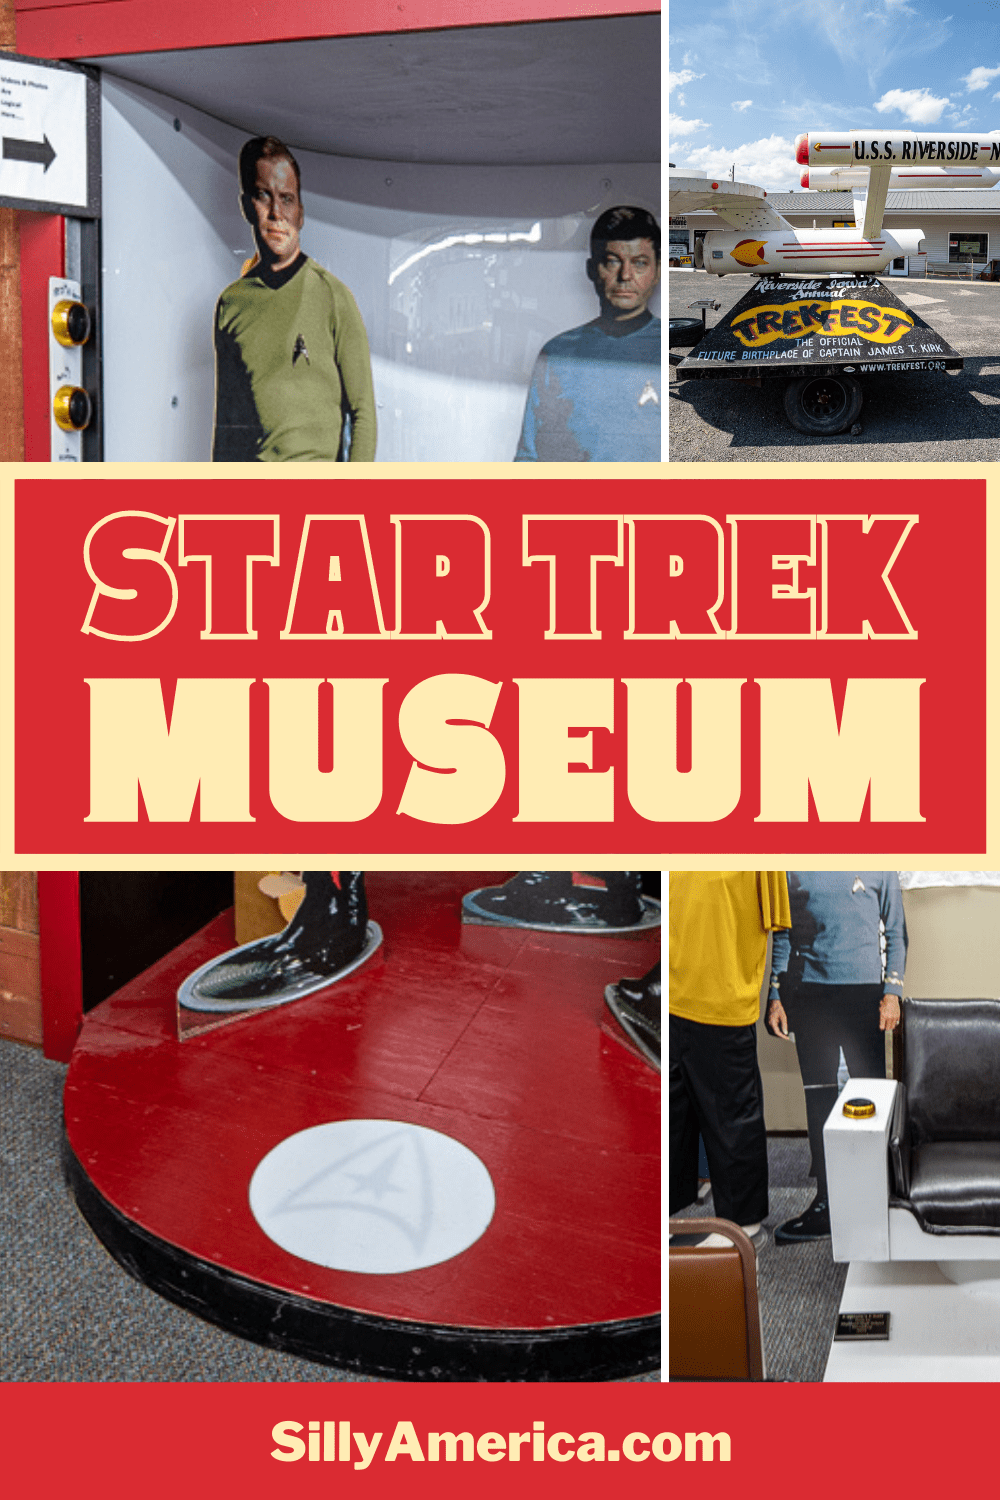 The Voyage Home History Center in Riverside, Iowa is a museum showcasing the town’s history…and future history. But most people would just call it a Star Trek Museum. Located in the Future Birthplace of Captain James T. Kirk this roadside attraction is a must see road trip stop. #StarTrek #IowaRoadsideAttractions #IowaRoadsideAttraction #RoadsideAttractions #RoadsideAttraction #RoadTrip #IowaRoadTrip #IowaThingsToDo #IowaRoadTripBucketLists #IowaBucketList #IowaRoadTripIdeas #IowaTravel